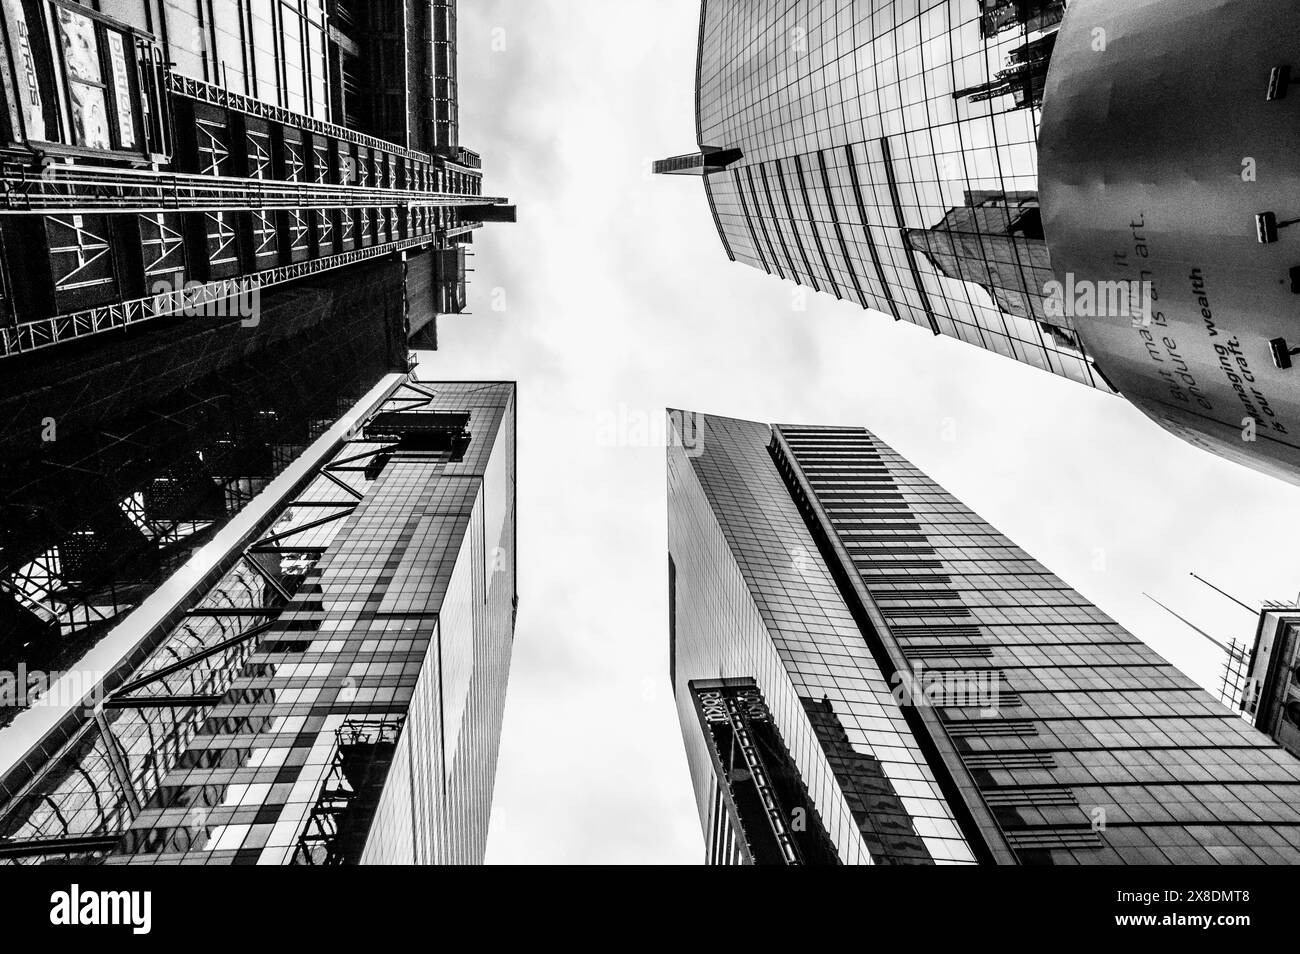 NYC giants reach for the sky! Towering Manhattan buildings dwarf pedestrians on bustling streets. Classic scene for travel and urban life content. Stock Photo